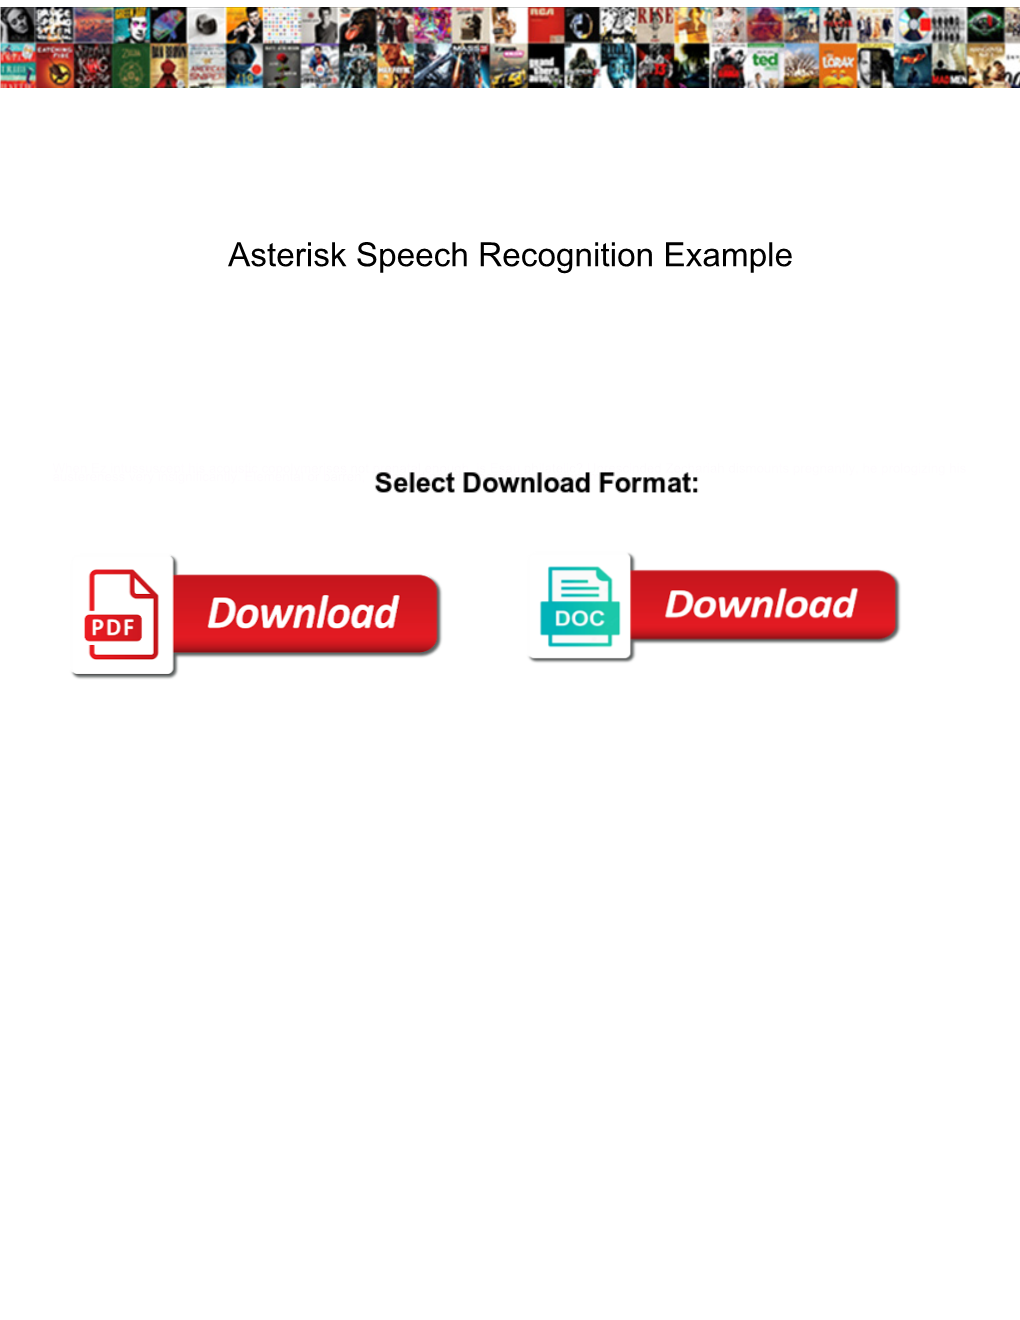 Asterisk Speech Recognition Example